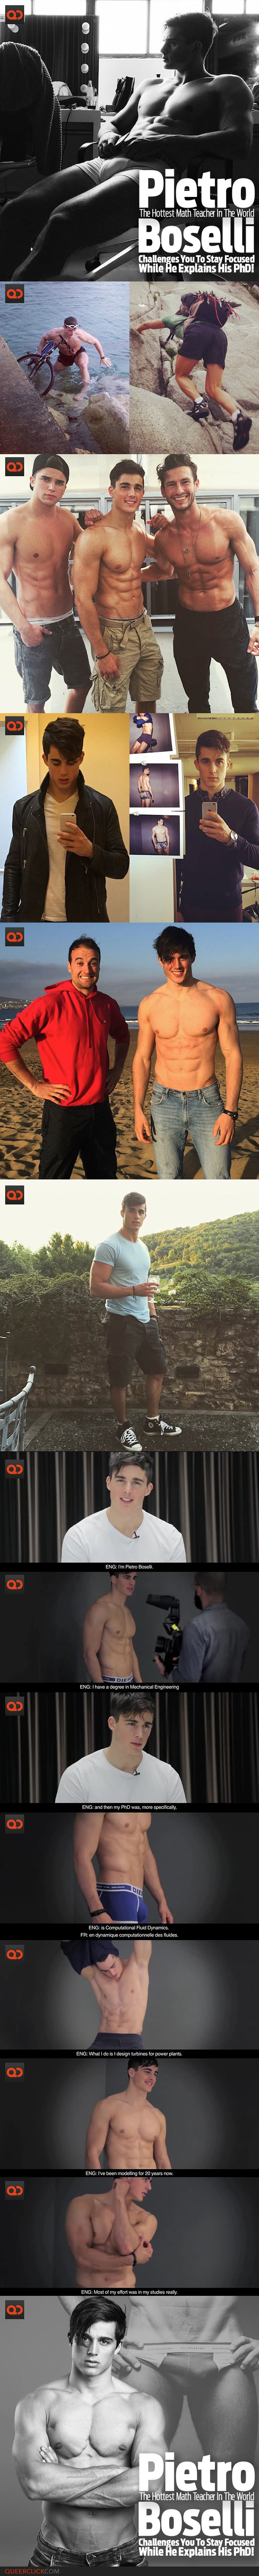 Pietro Boselli, The Hottest Maths Teacher In The World, Challenges You To Stay Focused While He Explains His PhD!